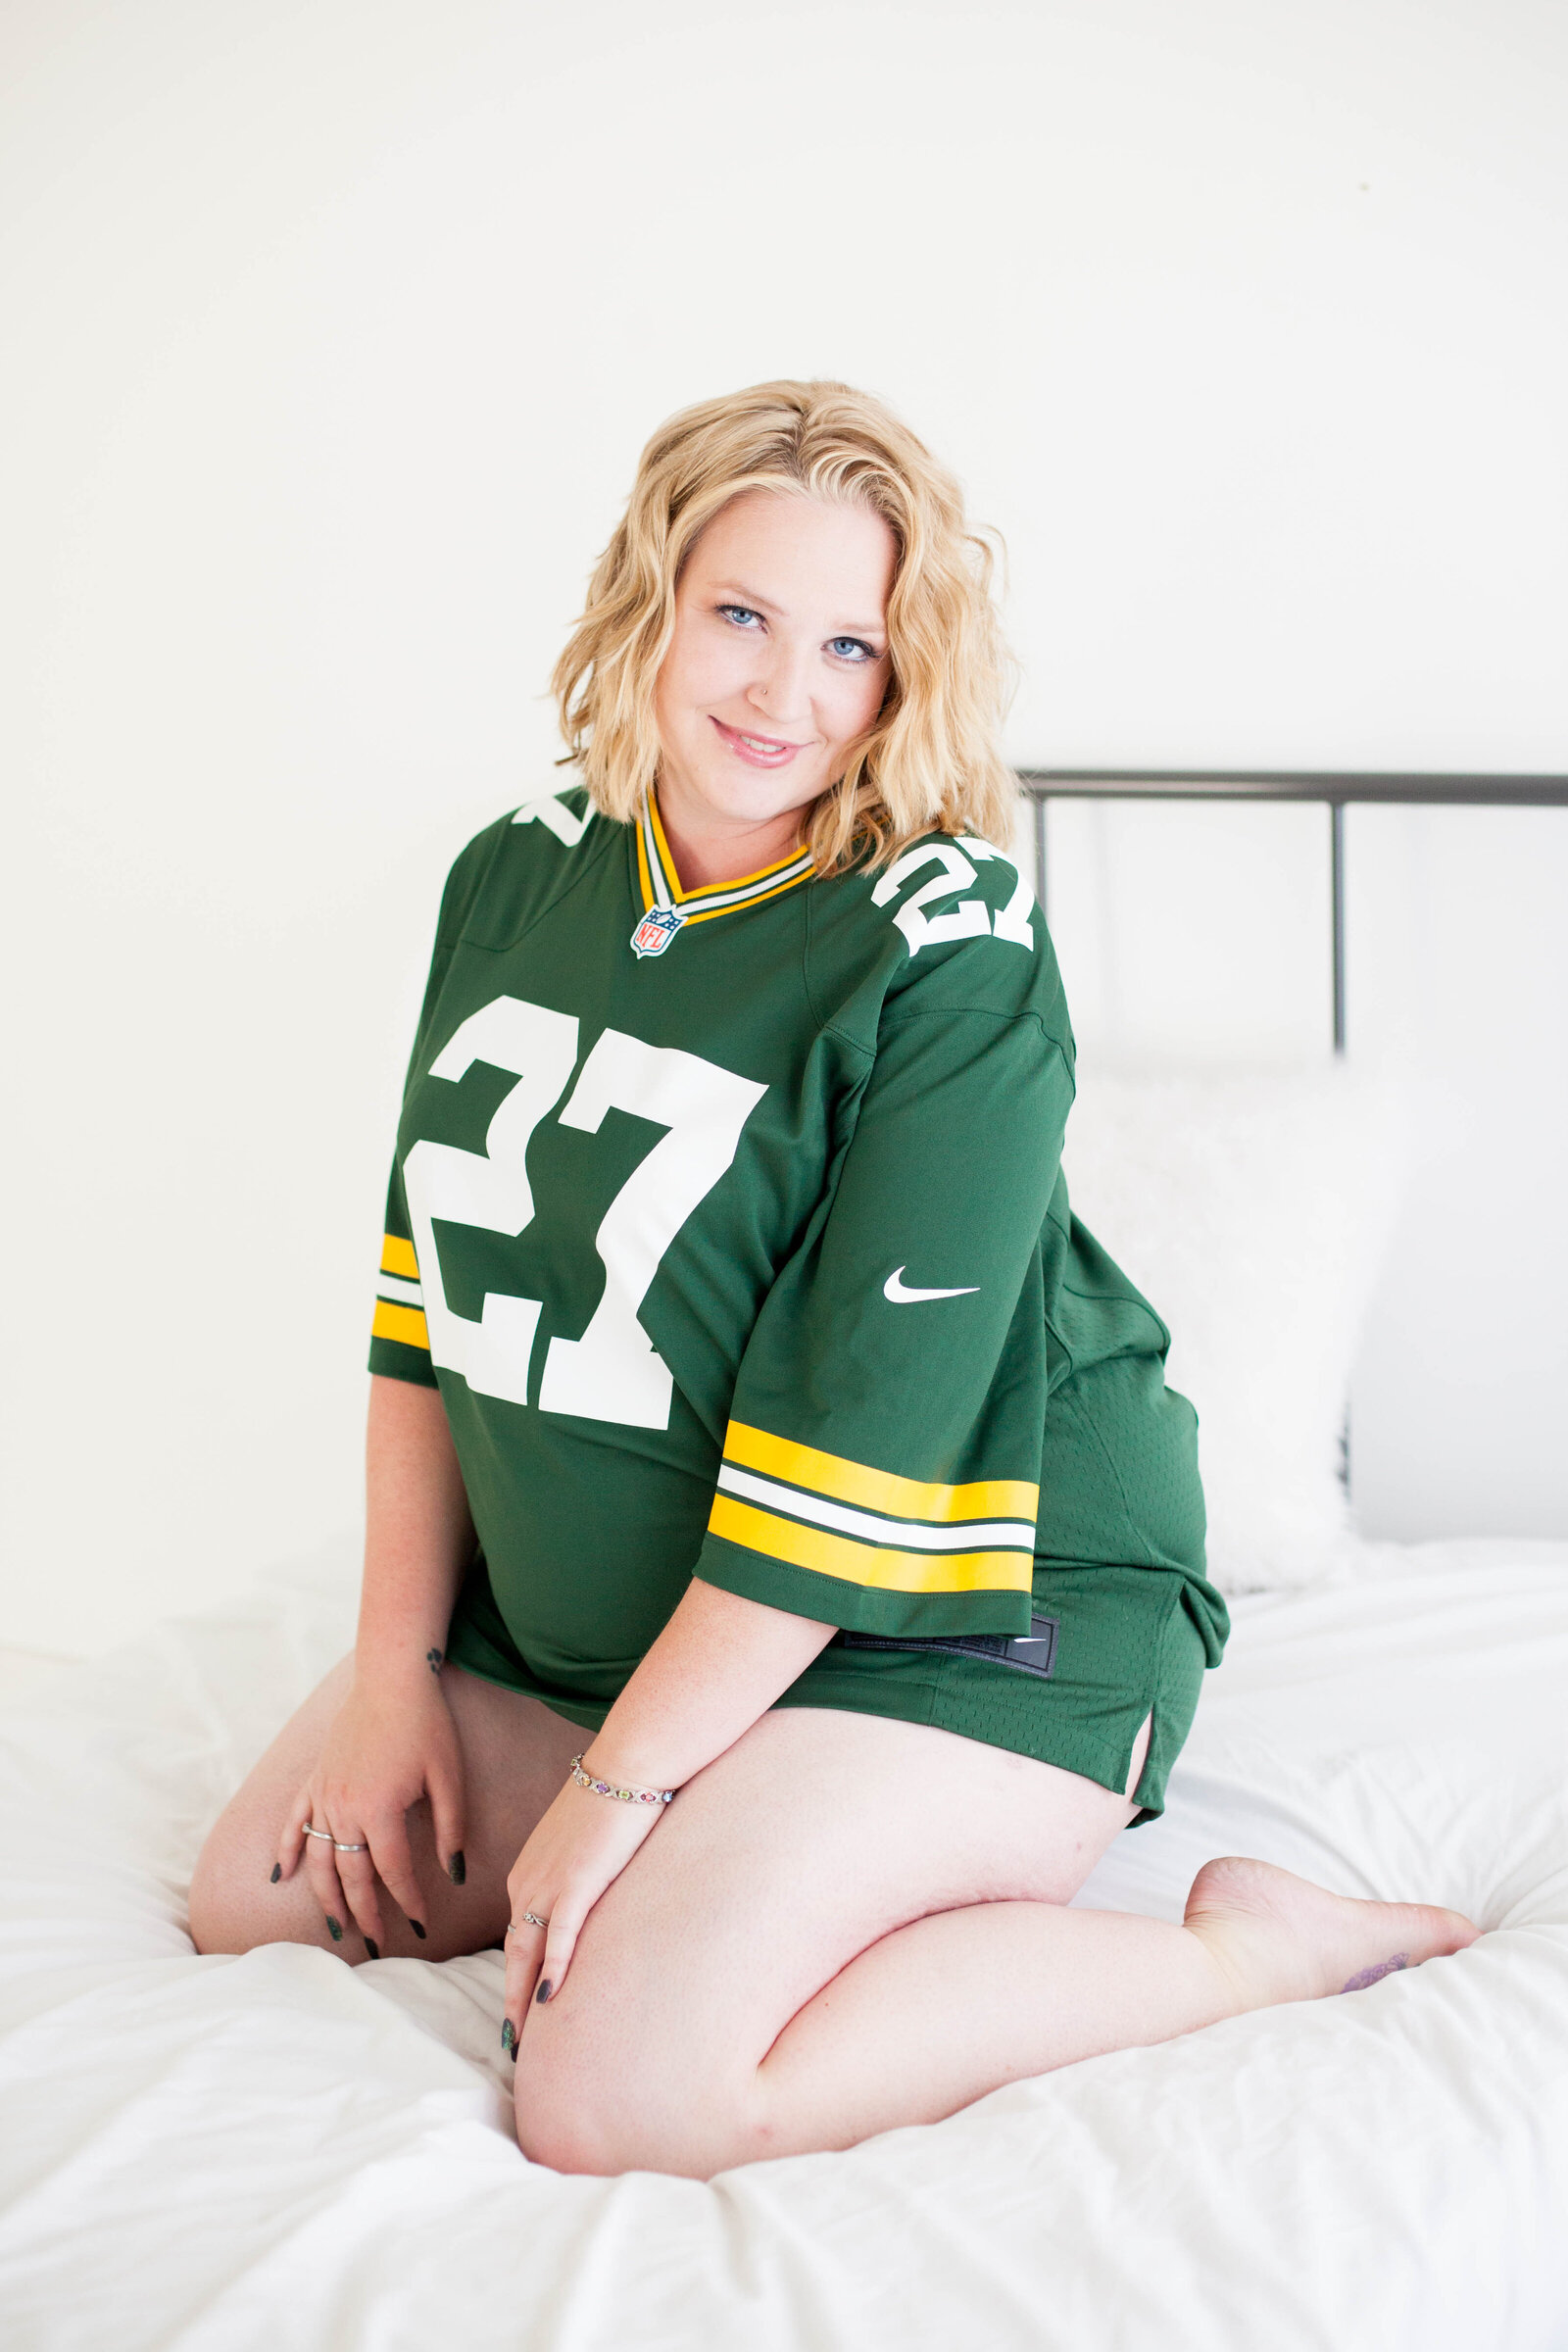 A blonde woman wearing a green and yellow jersey.